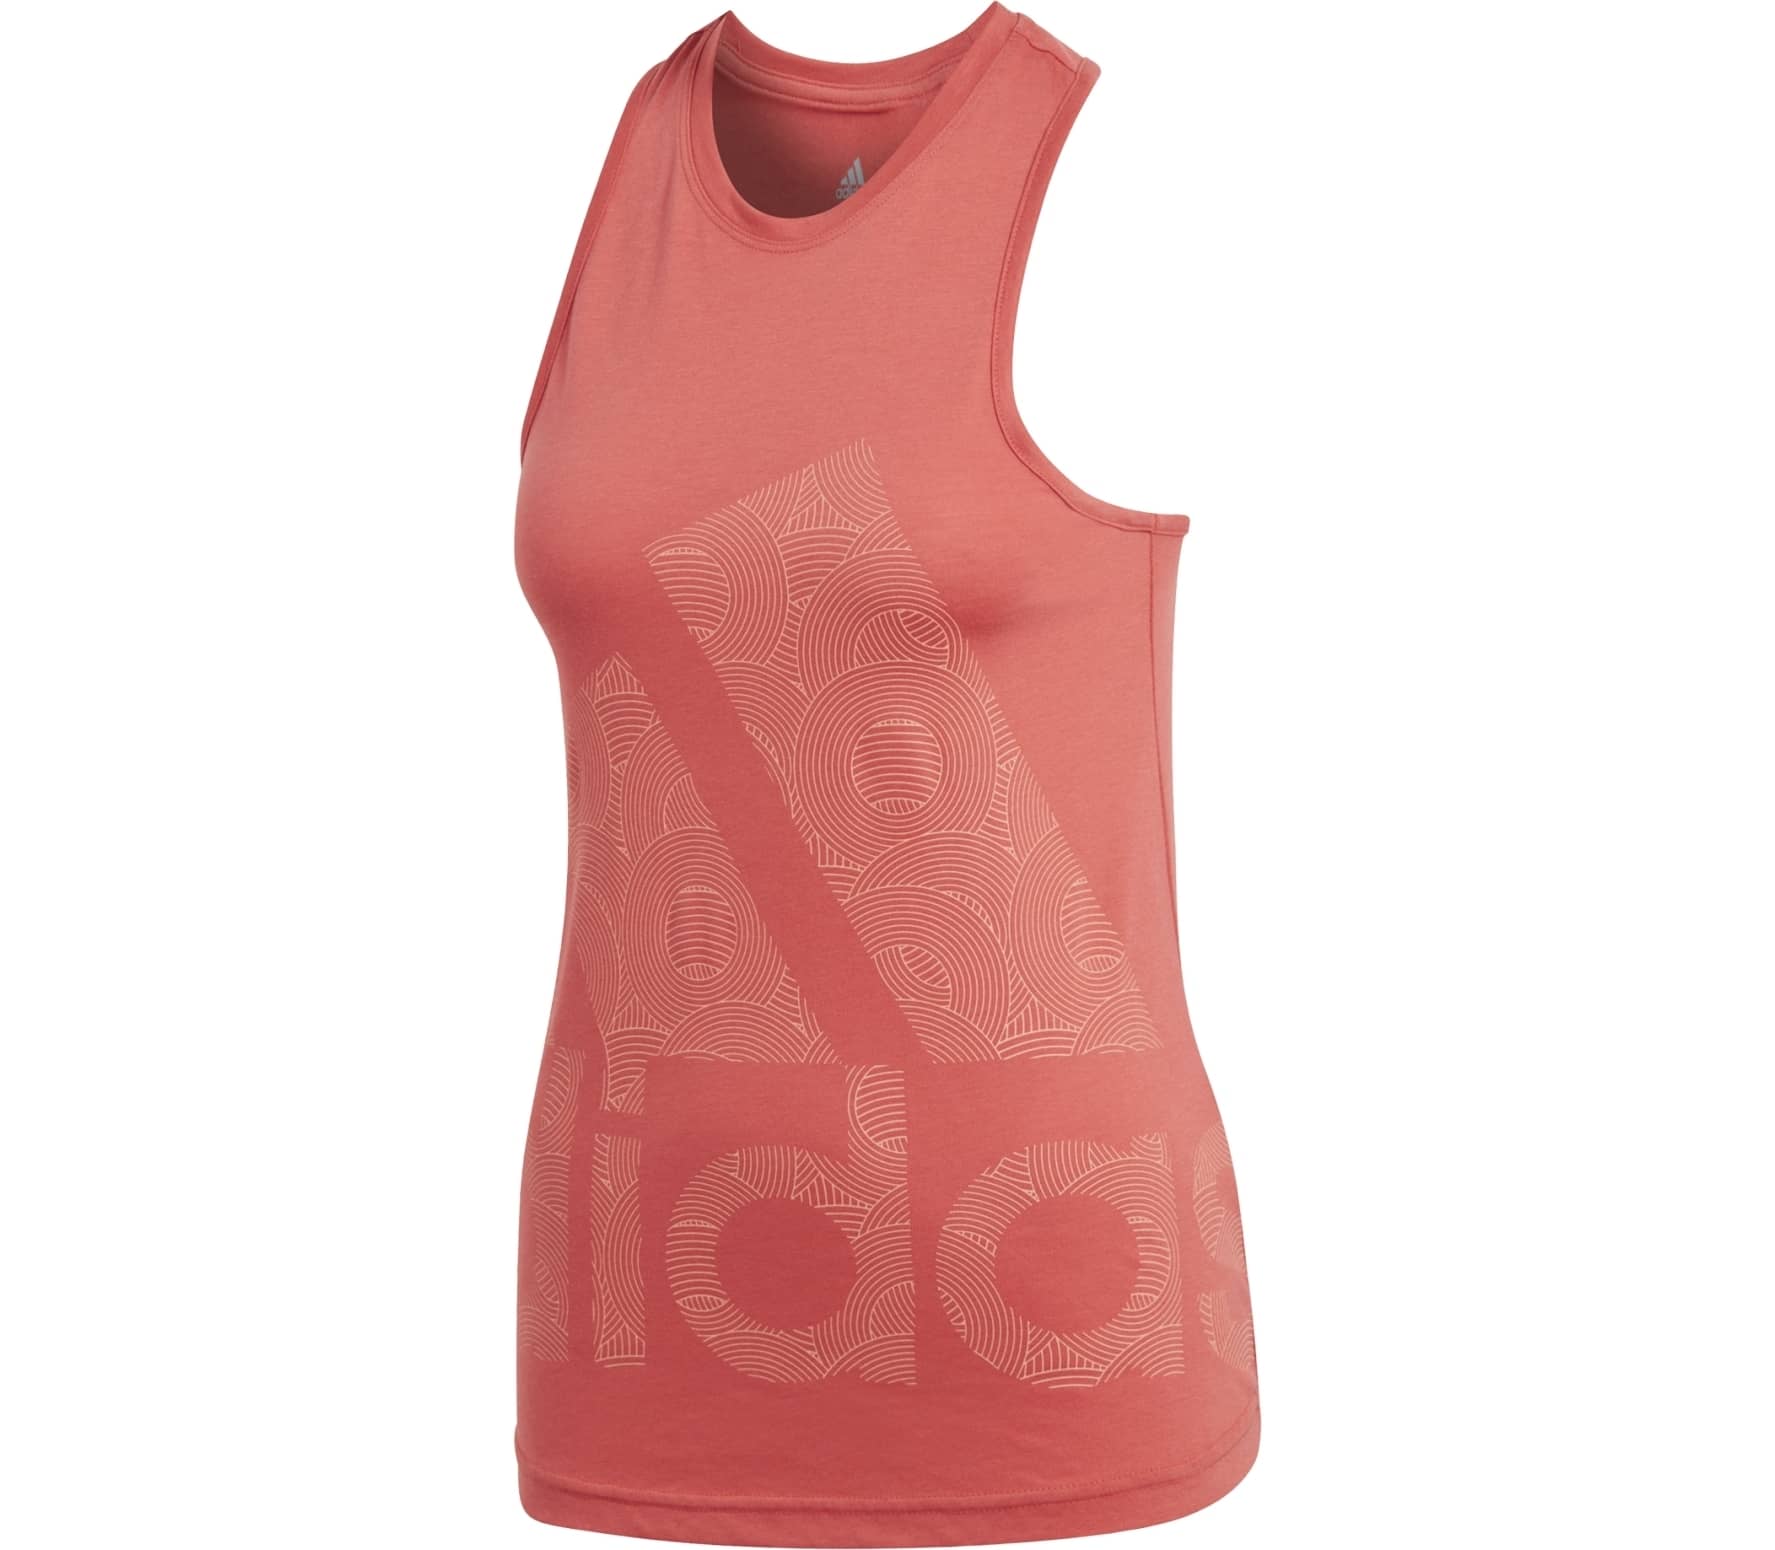 Top Red Logo - Adidas Cool women's training tank top top (red) it at